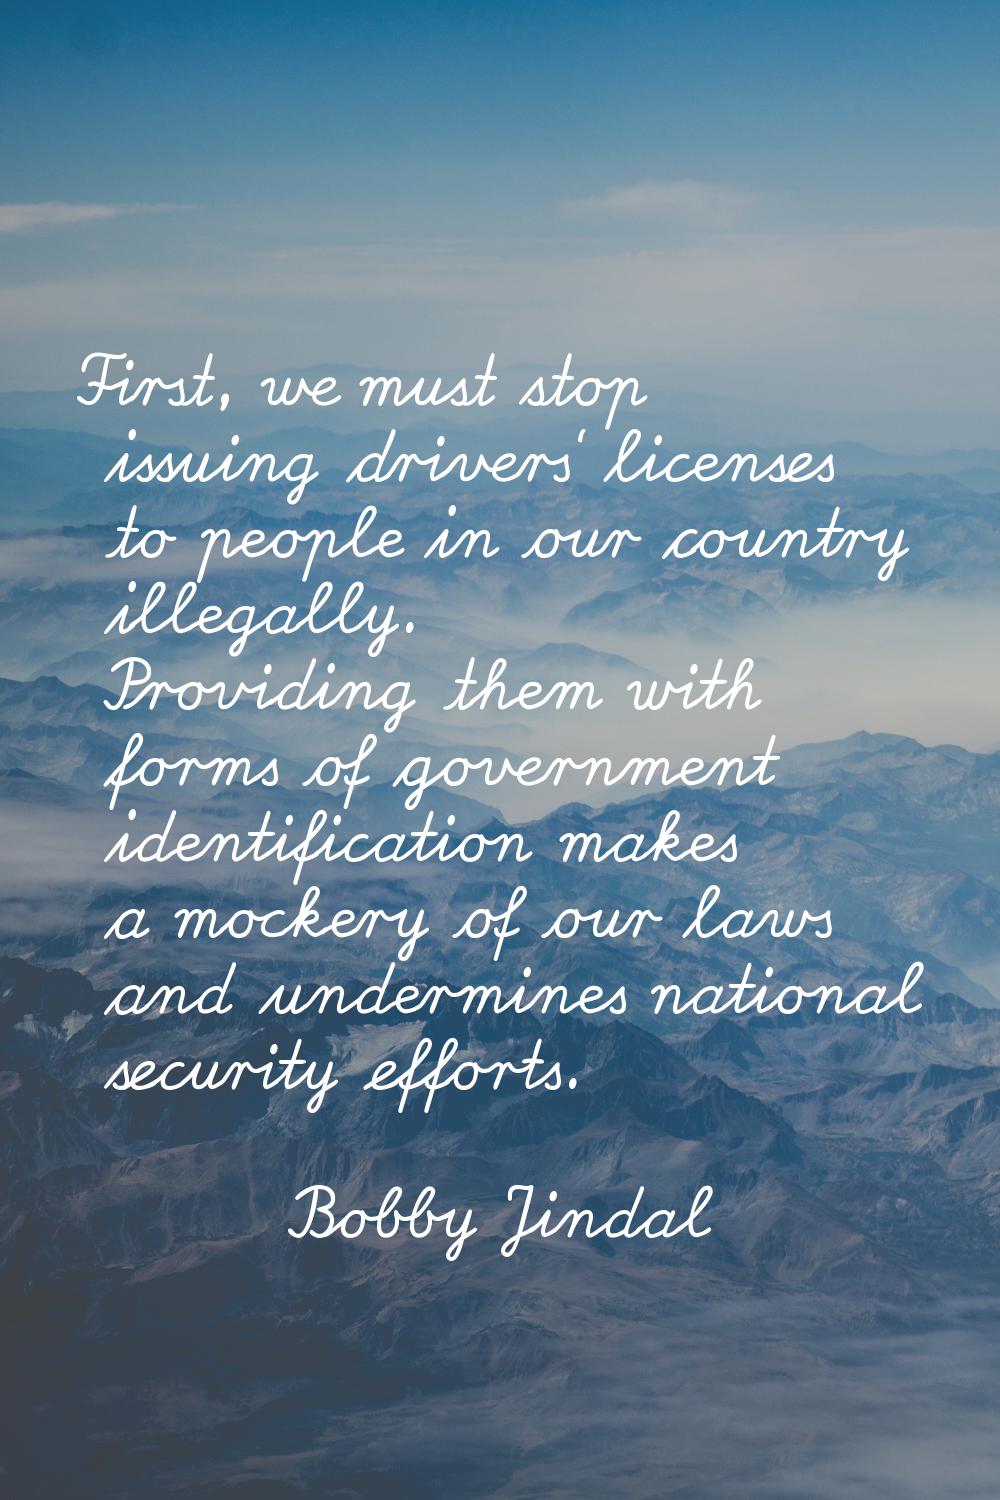 First, we must stop issuing drivers' licenses to people in our country illegally. Providing them wi